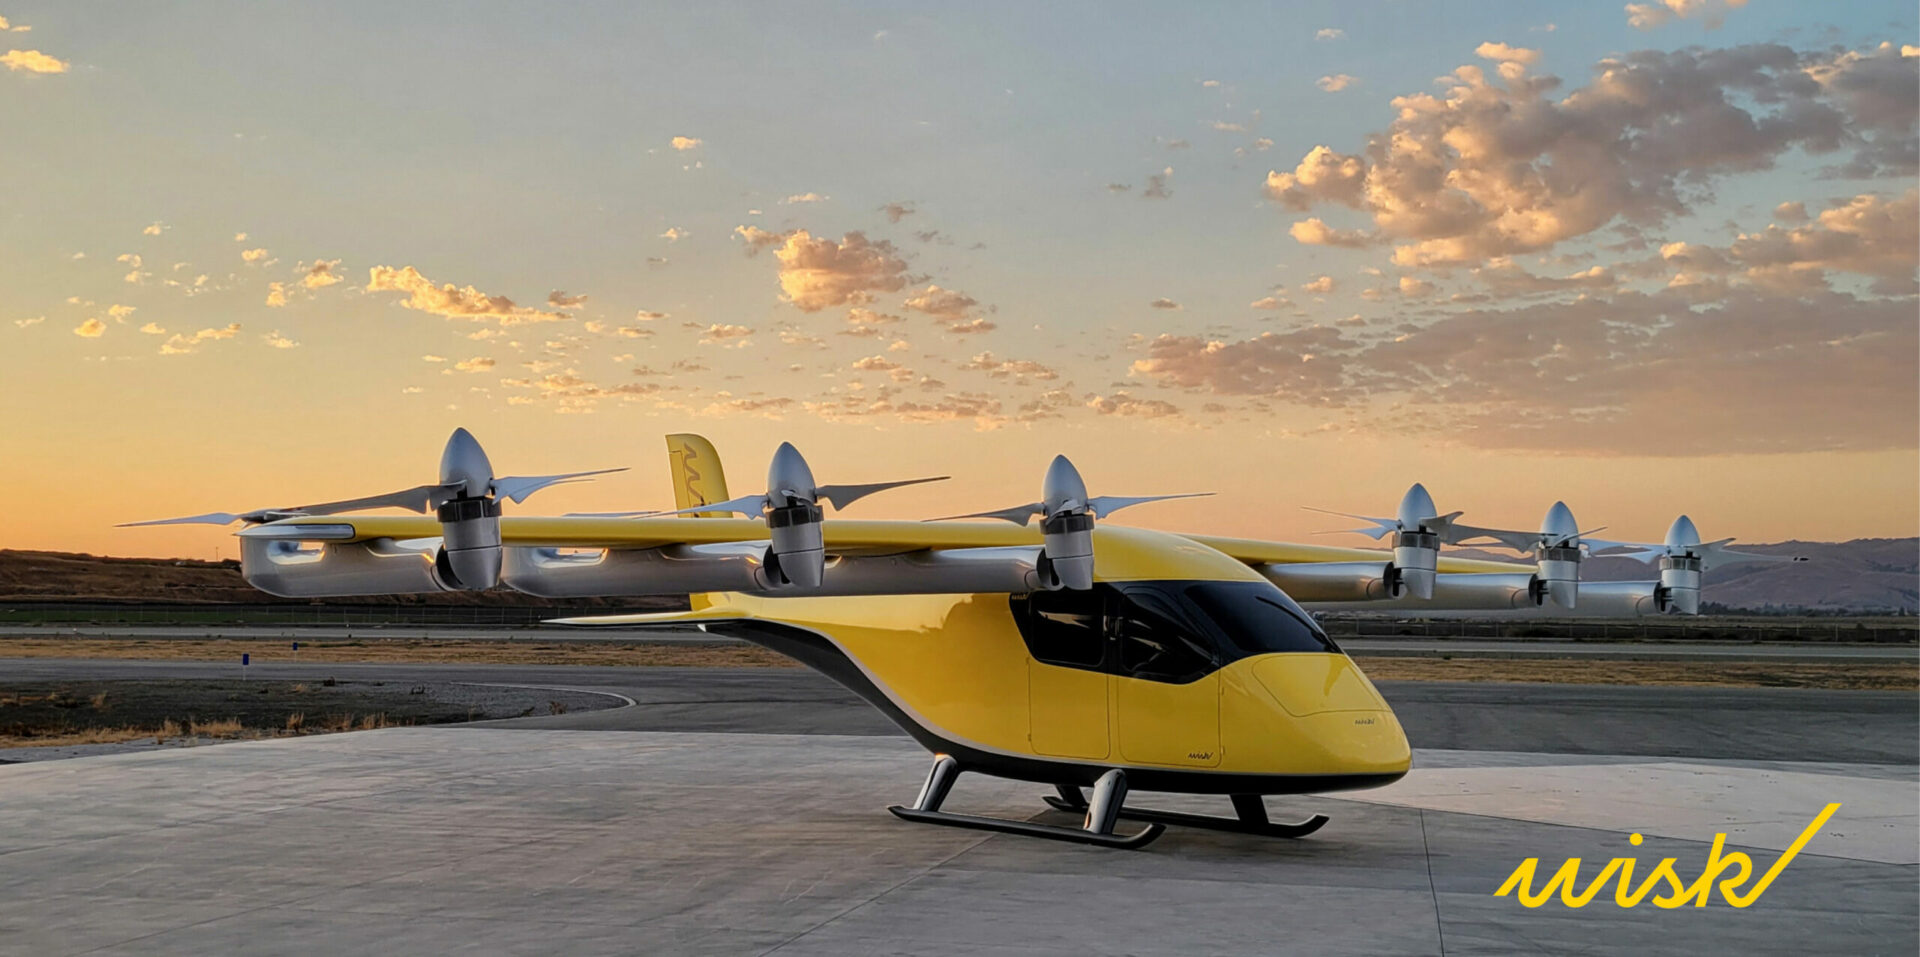 Wisk Boeing air taxi